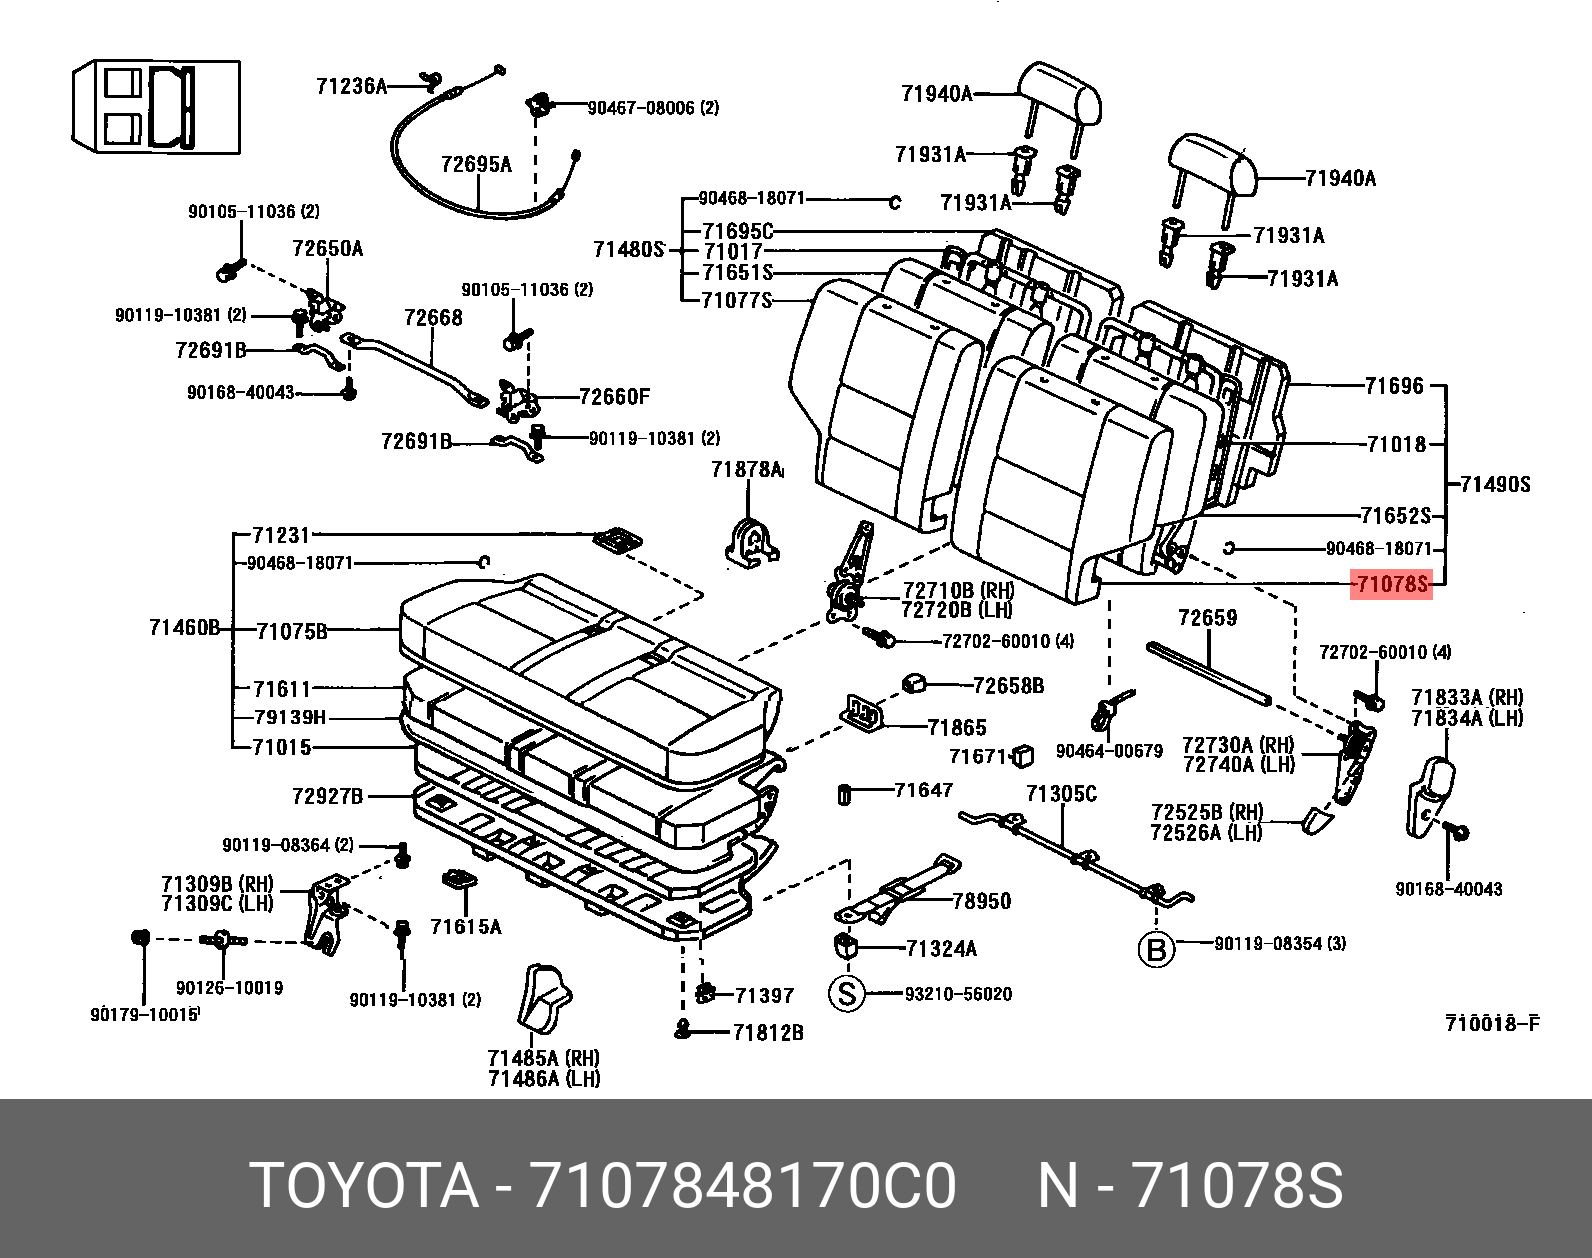 7107848170C0, HARRIER 199712-200302, ACU1#, MCU1#, SXU1#, COVER, REAR SEAT BACK, LH(FOR SEPARATE TYPE)